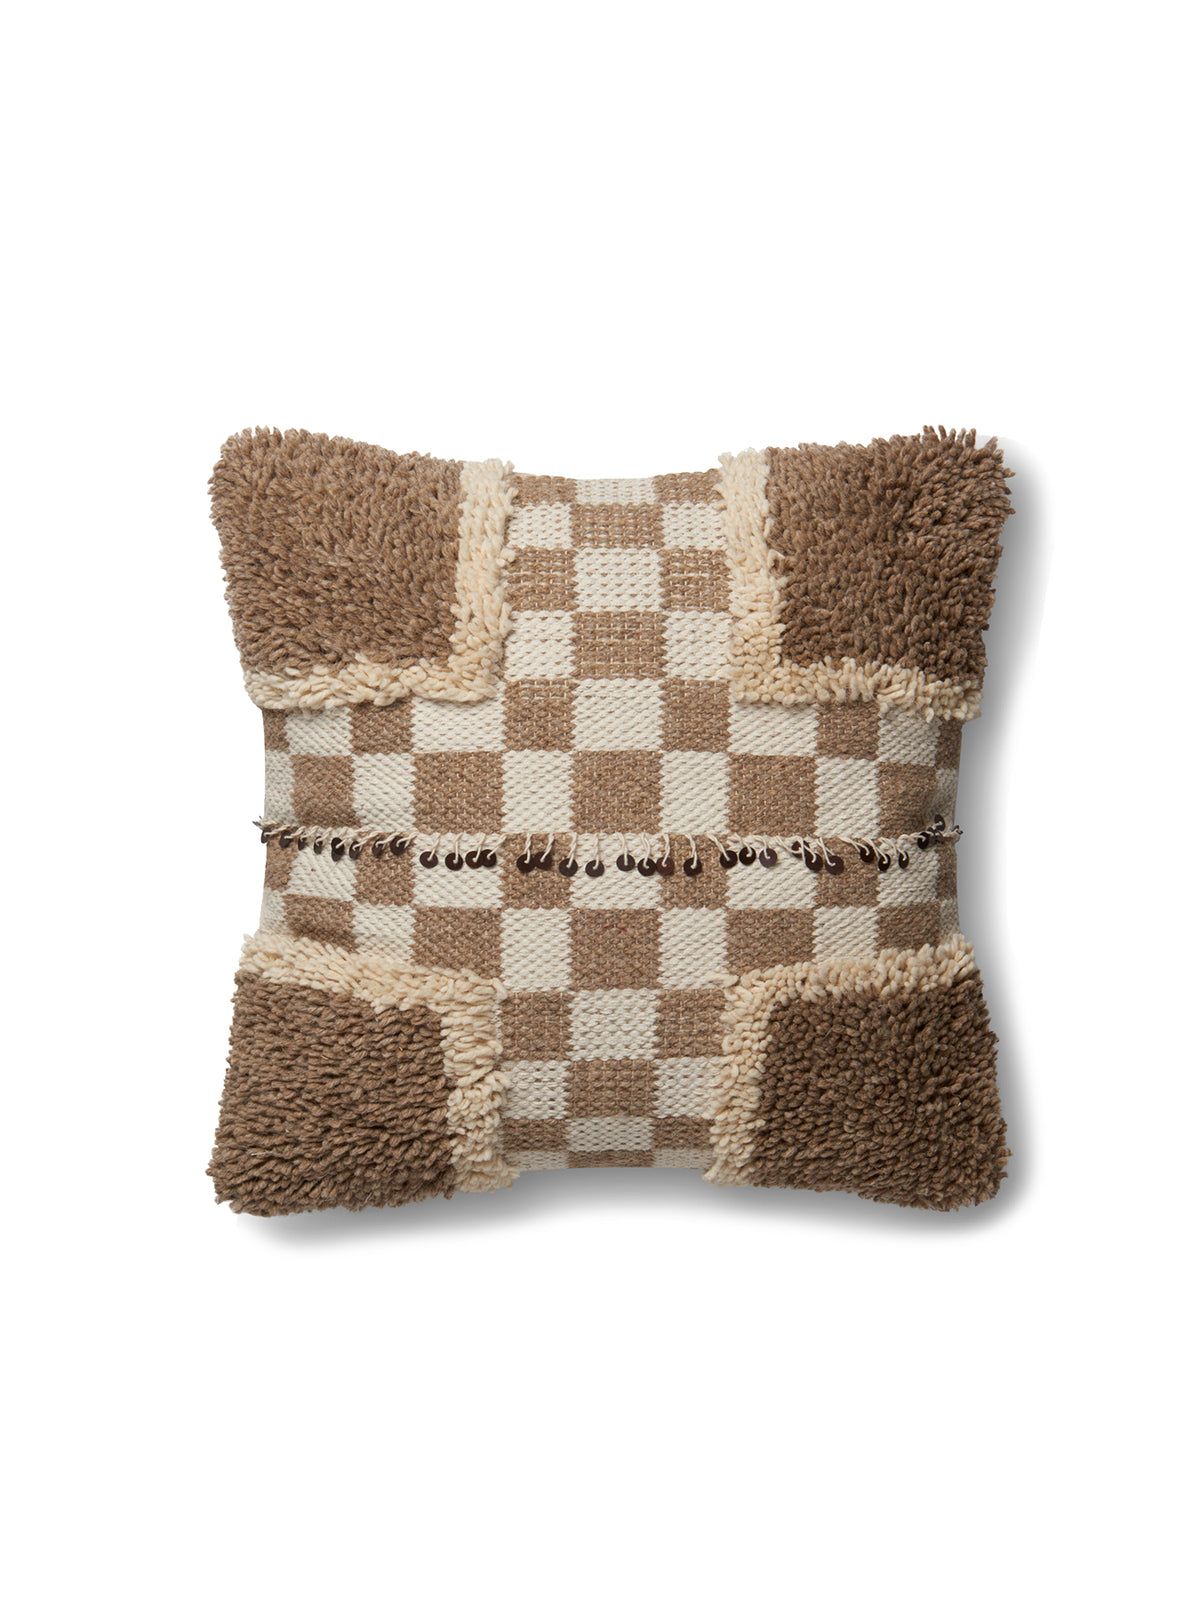 P4030 Tufted Checkerboard Pillow